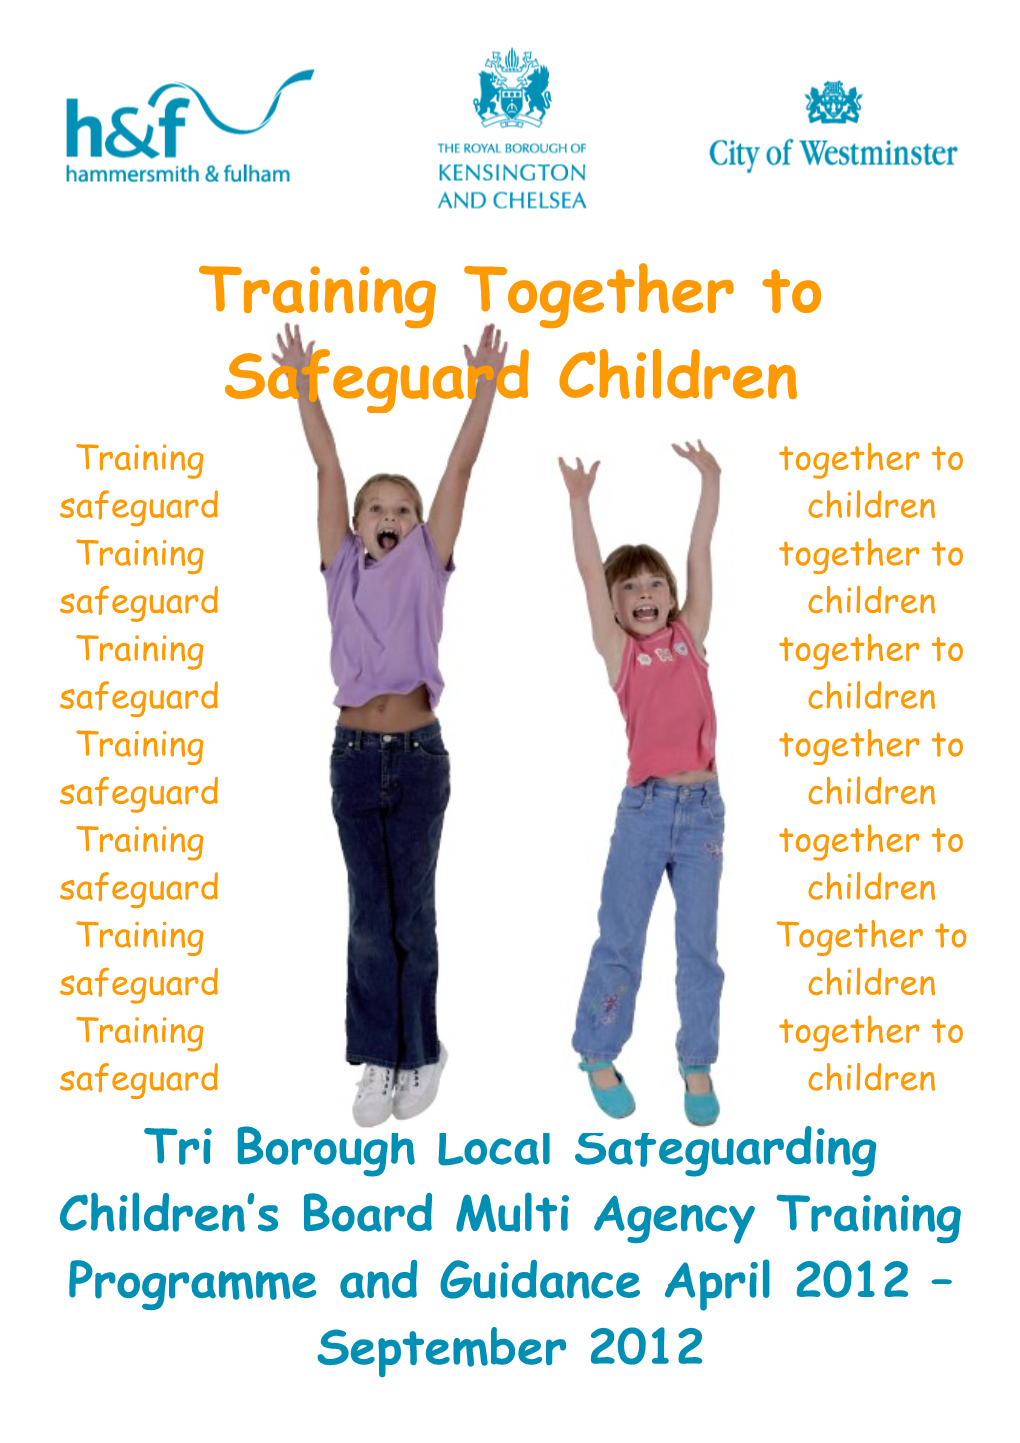 Training Together to Safeguard Children Training Together to Safeguard Children Training